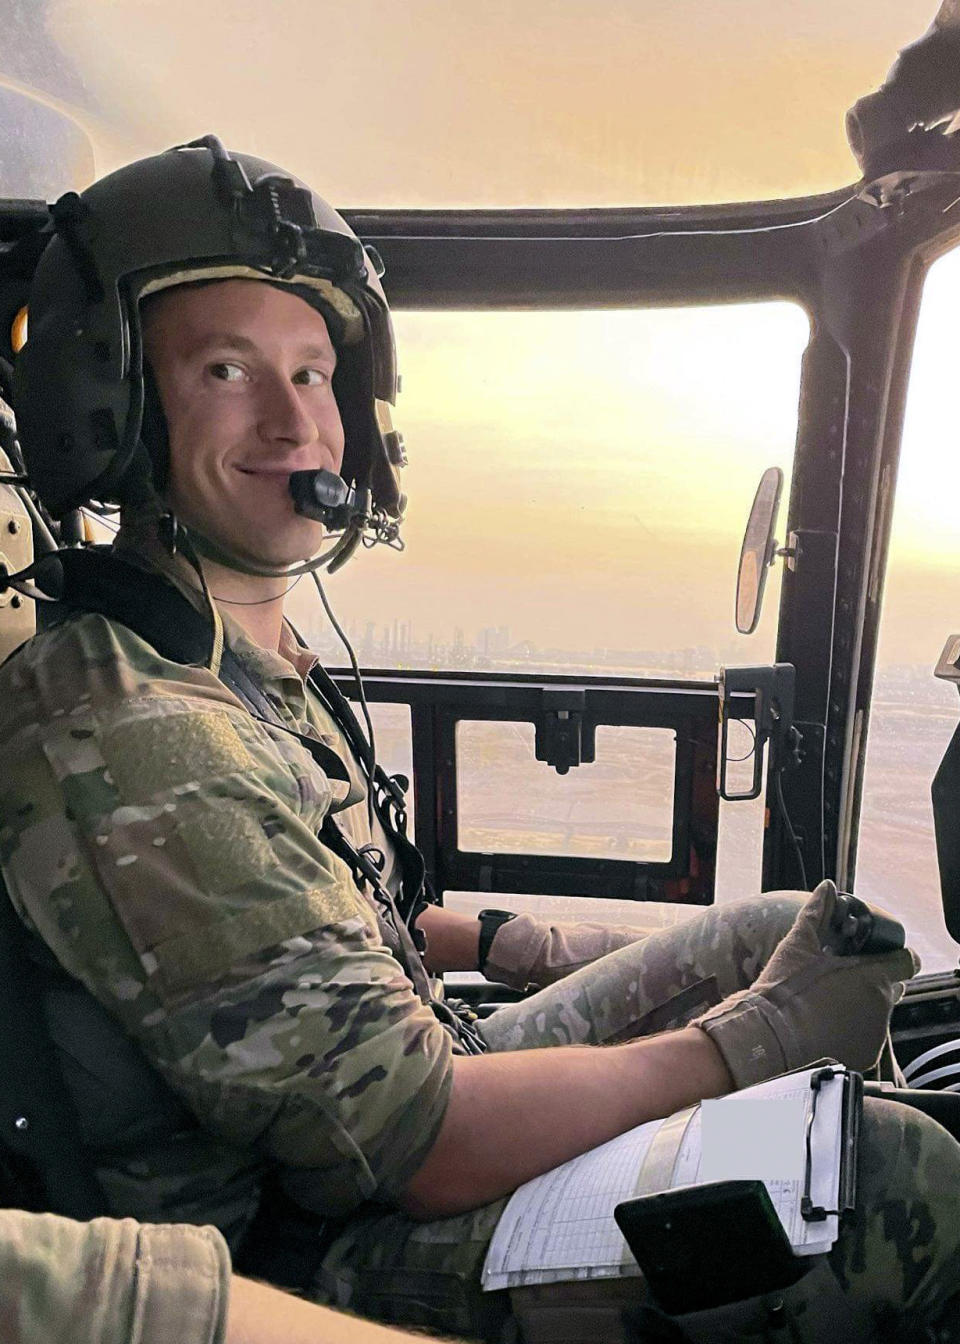 This image provided by the Hoernemann family shows Air Force Maj. Jeff Hoernemann as he flies a CV-22B Osprey in support of the Afghanistan Operation Freedom's Sentinel in 2021. Hoernemann loved the Osprey and was one of its most vocal defenders online. He was killed in a November 2023 Osprey crash off the coast of Japan. On Wednesday, June 12, 2024, the House oversight subcommittee on national security, the border and foreign affairs will hold a hearing looking into the V-22s safety concerns and Pentagon management of the program. (The Hoernemann Family via AP)